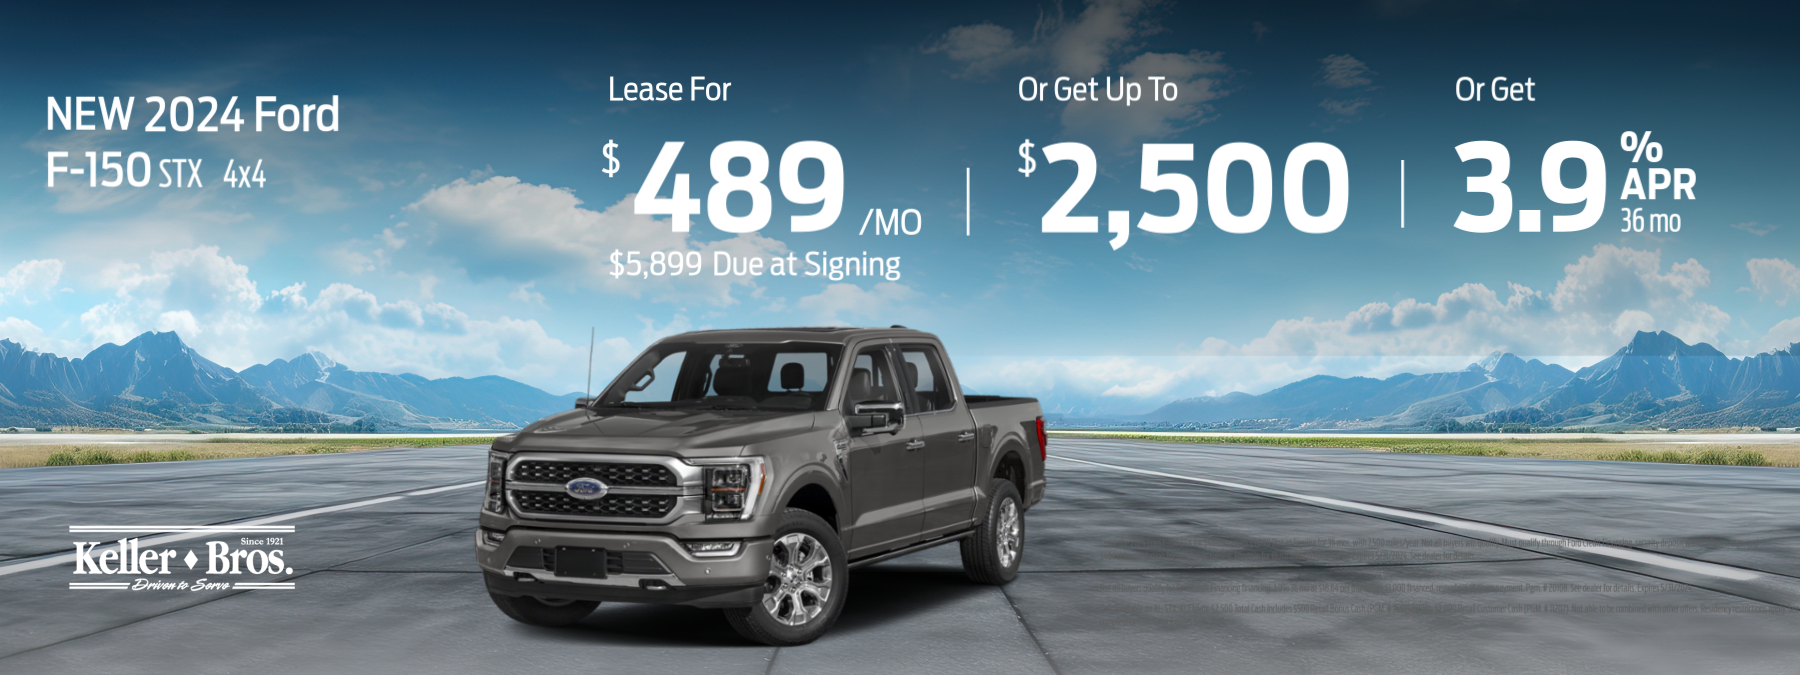 Check out these new offers of the Ford F-150!